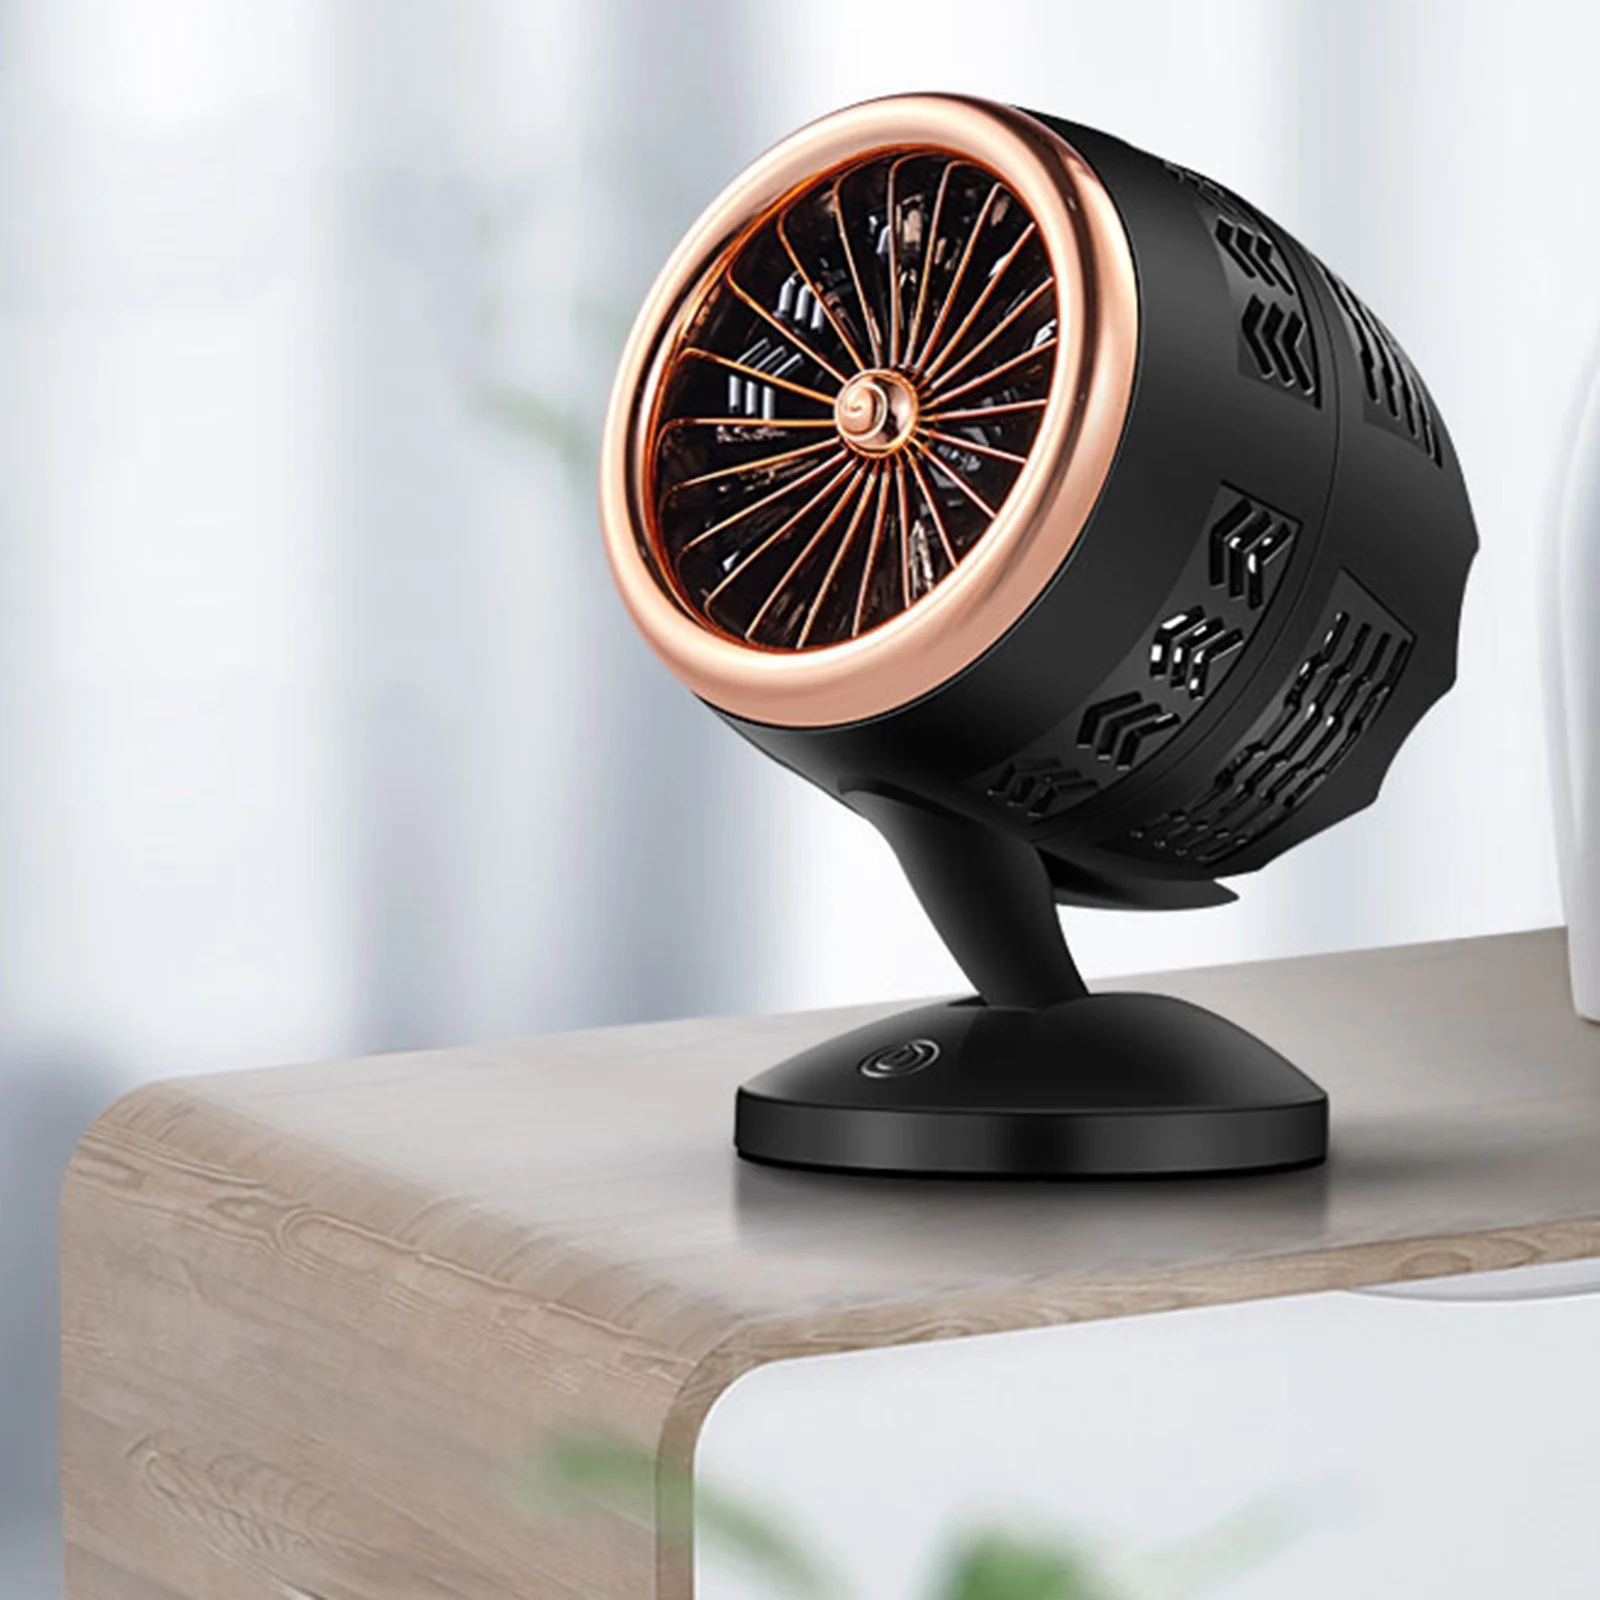 Small Personal USB Powered Table Desk Fan Cooling Fan Twin Turbo Blades Mute soft wind for Home Office Outdoor Travel